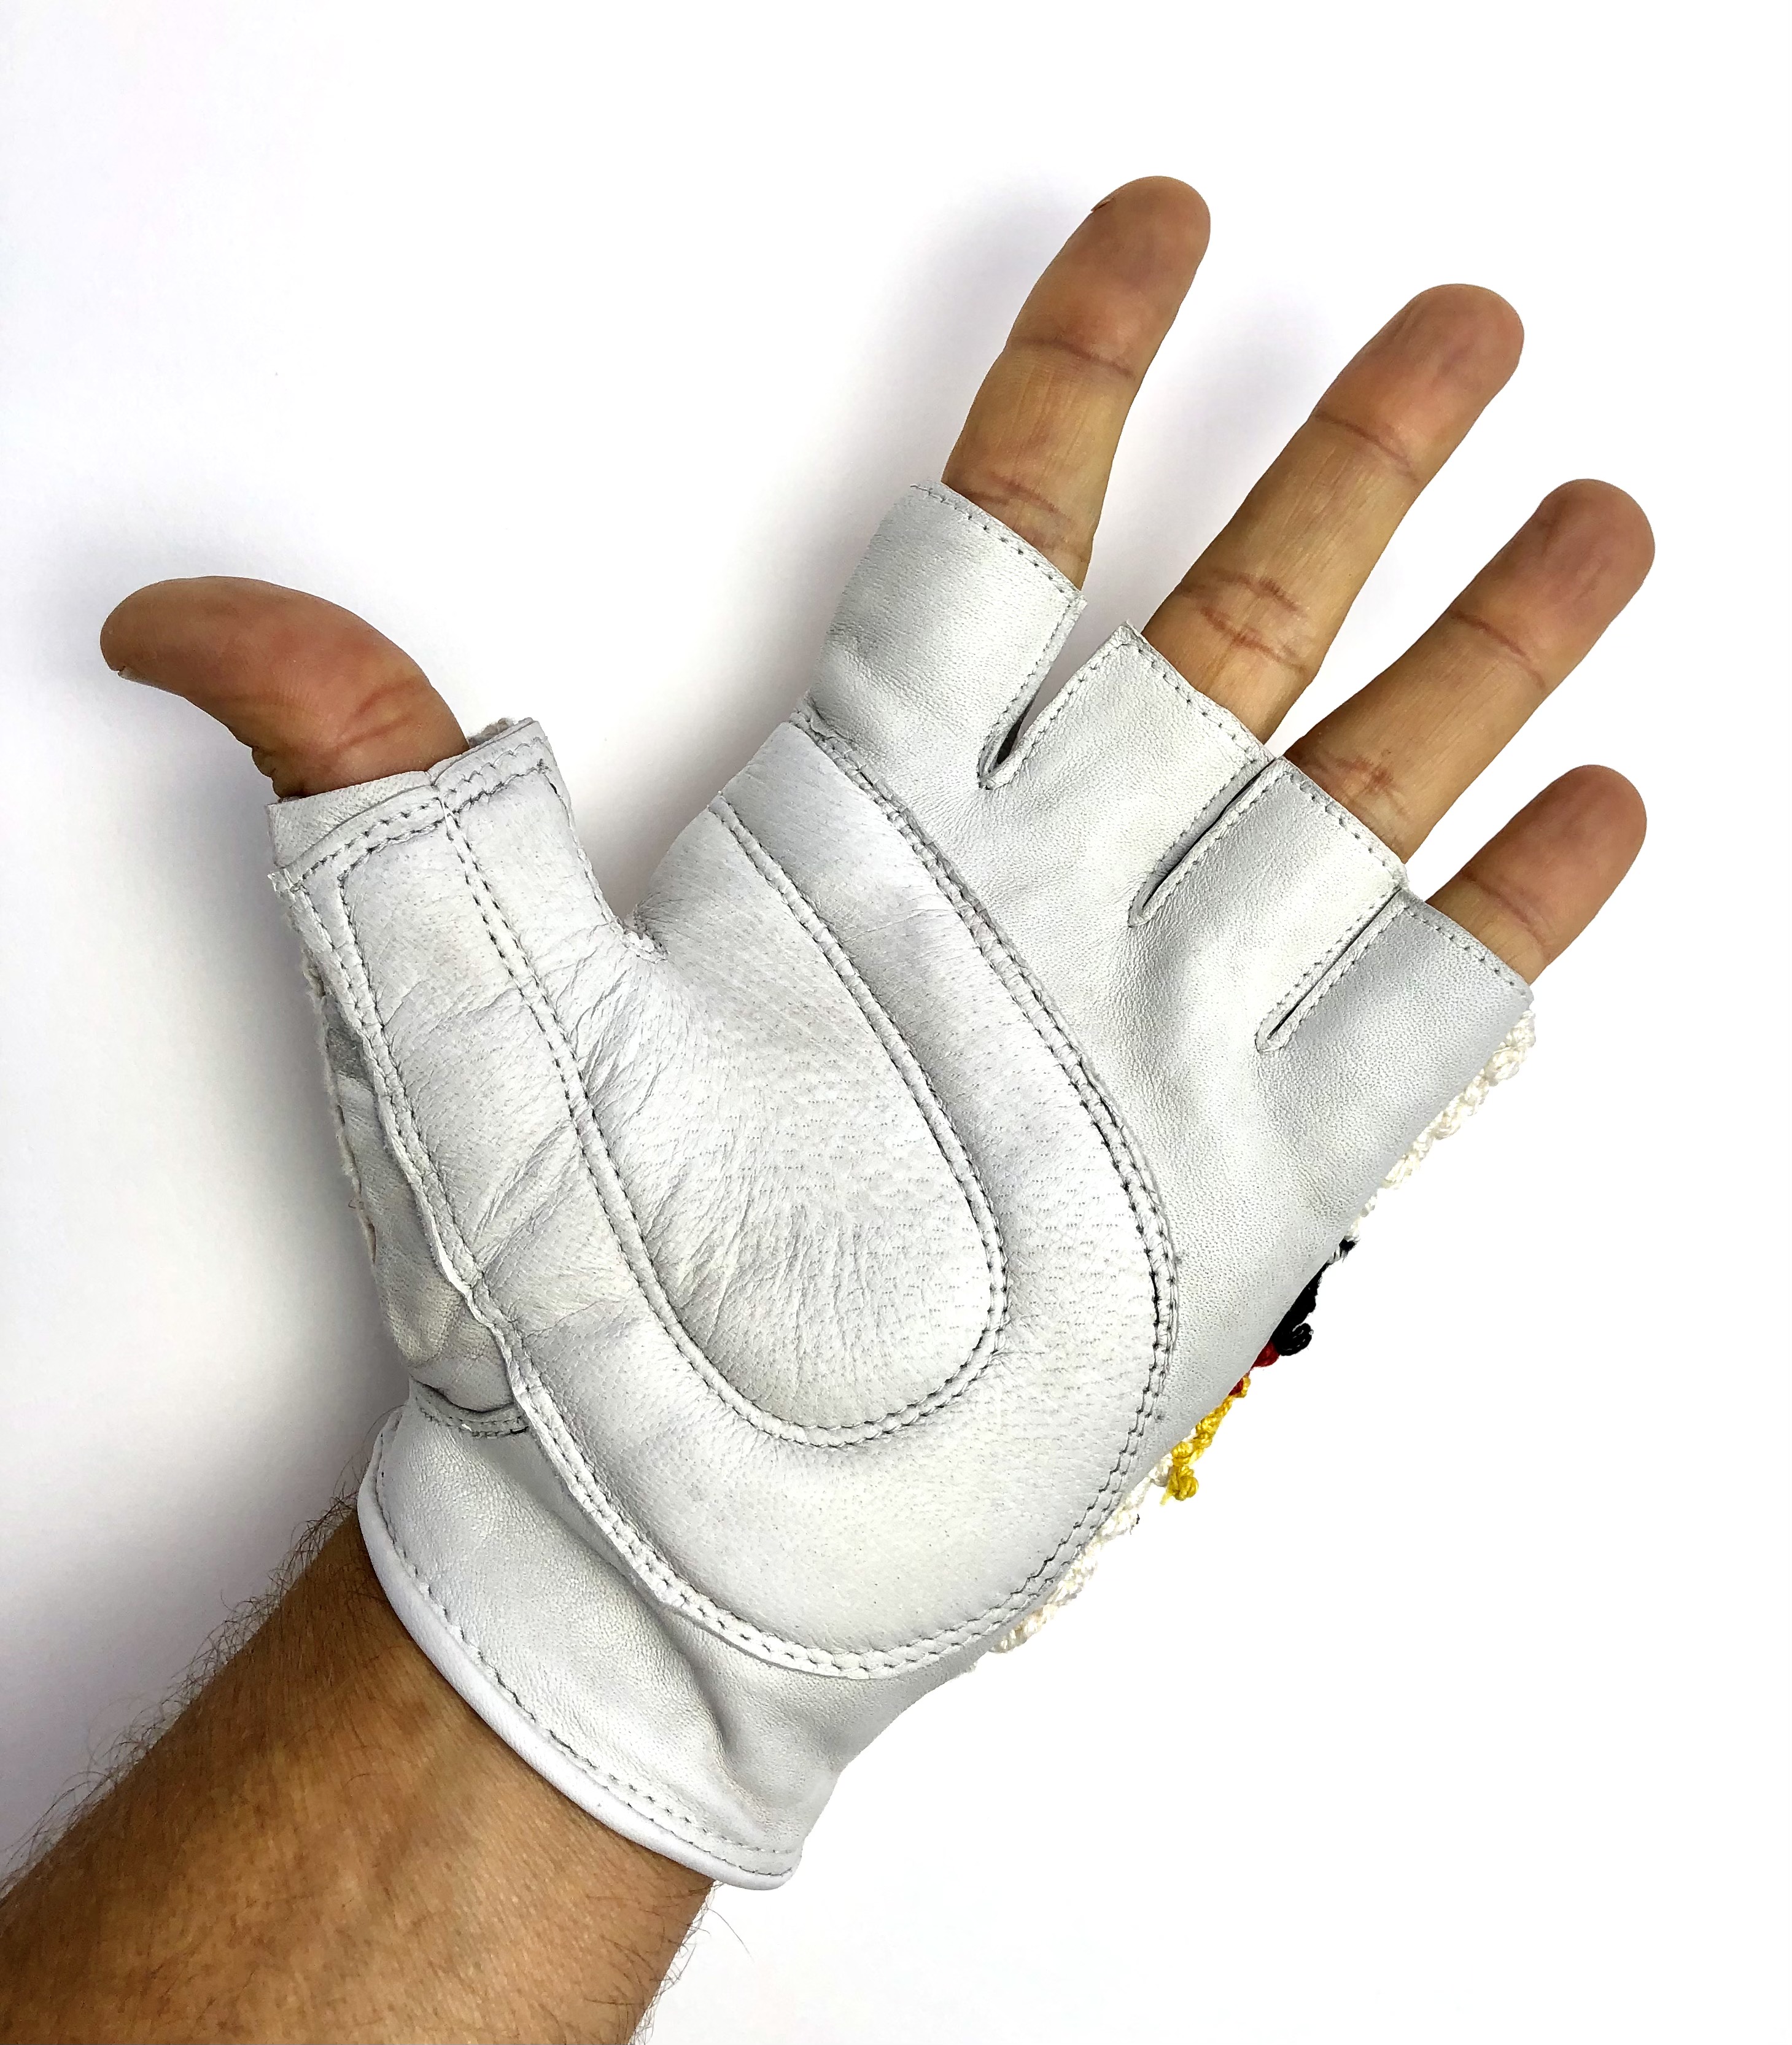 Original GANT 1970s vintage bicycle gloves with chrocheted upper hand Size 12